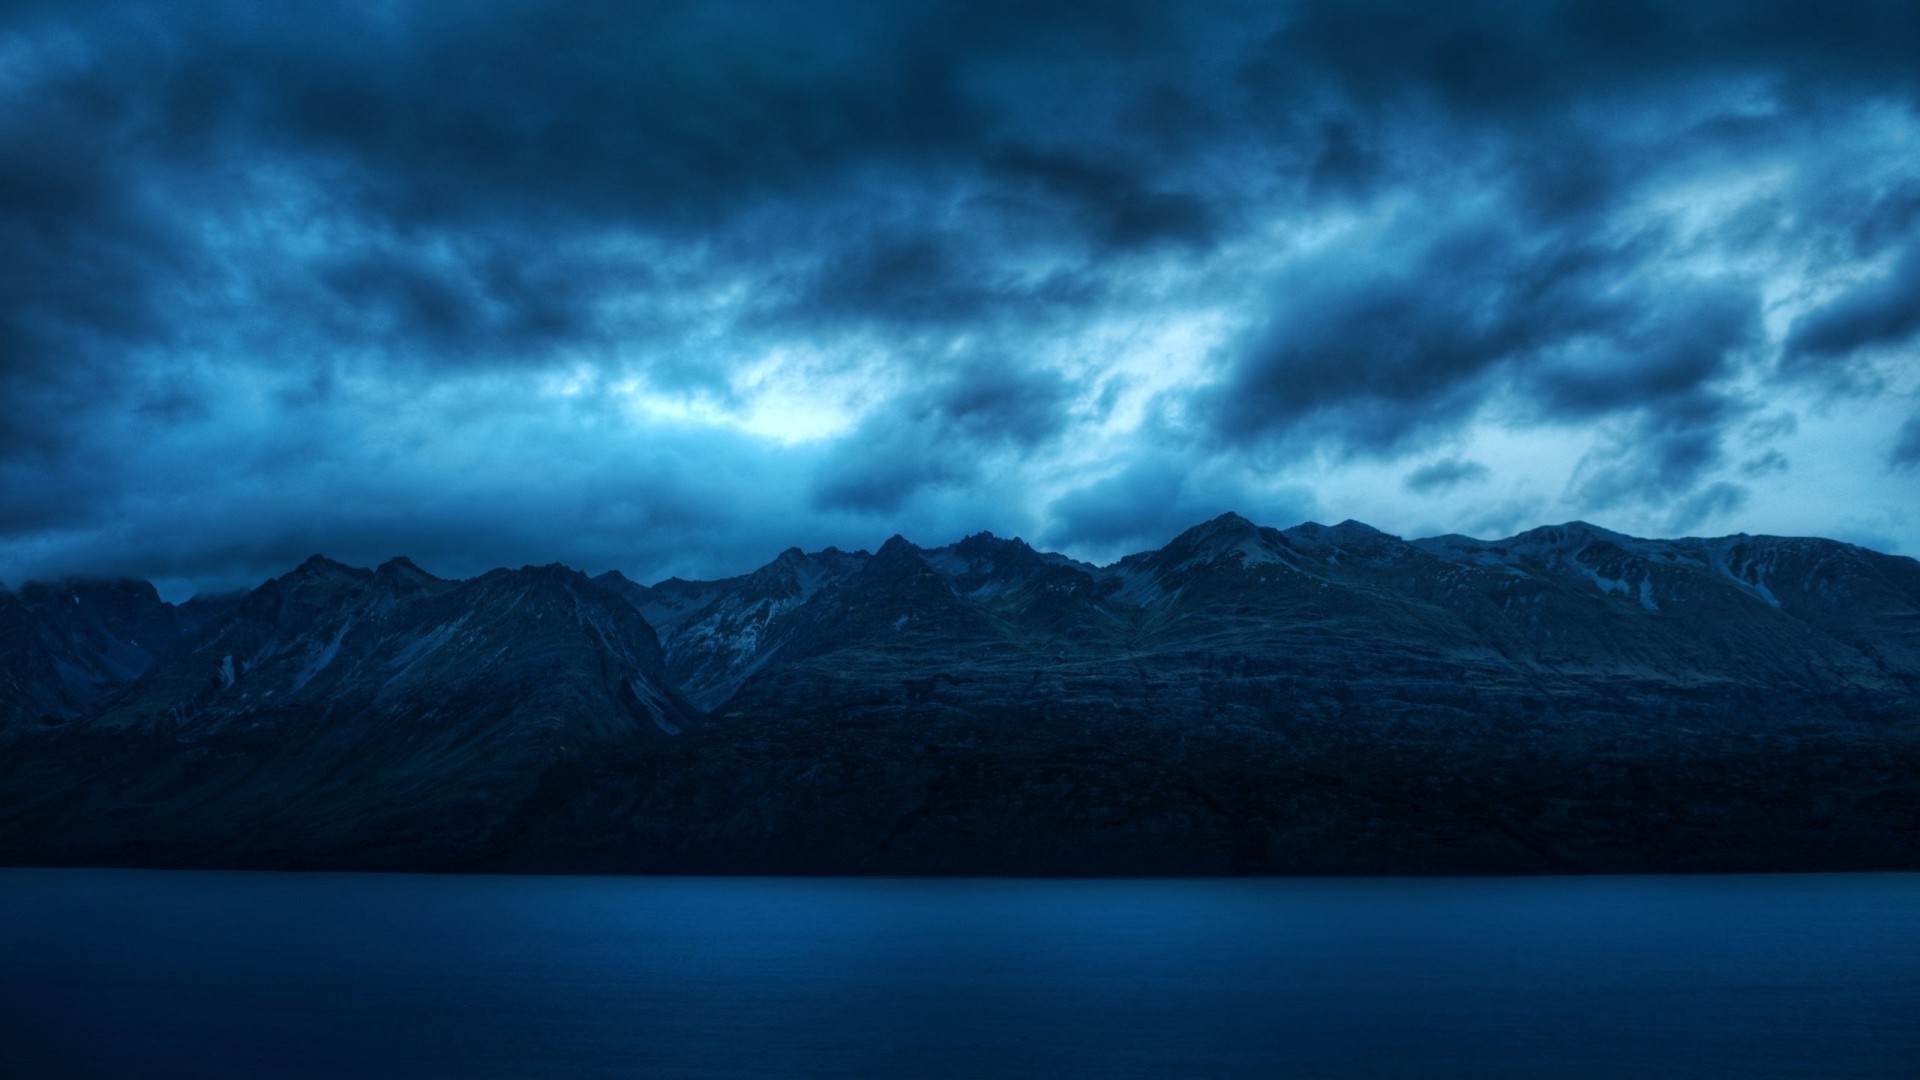 1920x1080 wallpapers: water, blue, mountains, landscape (image)